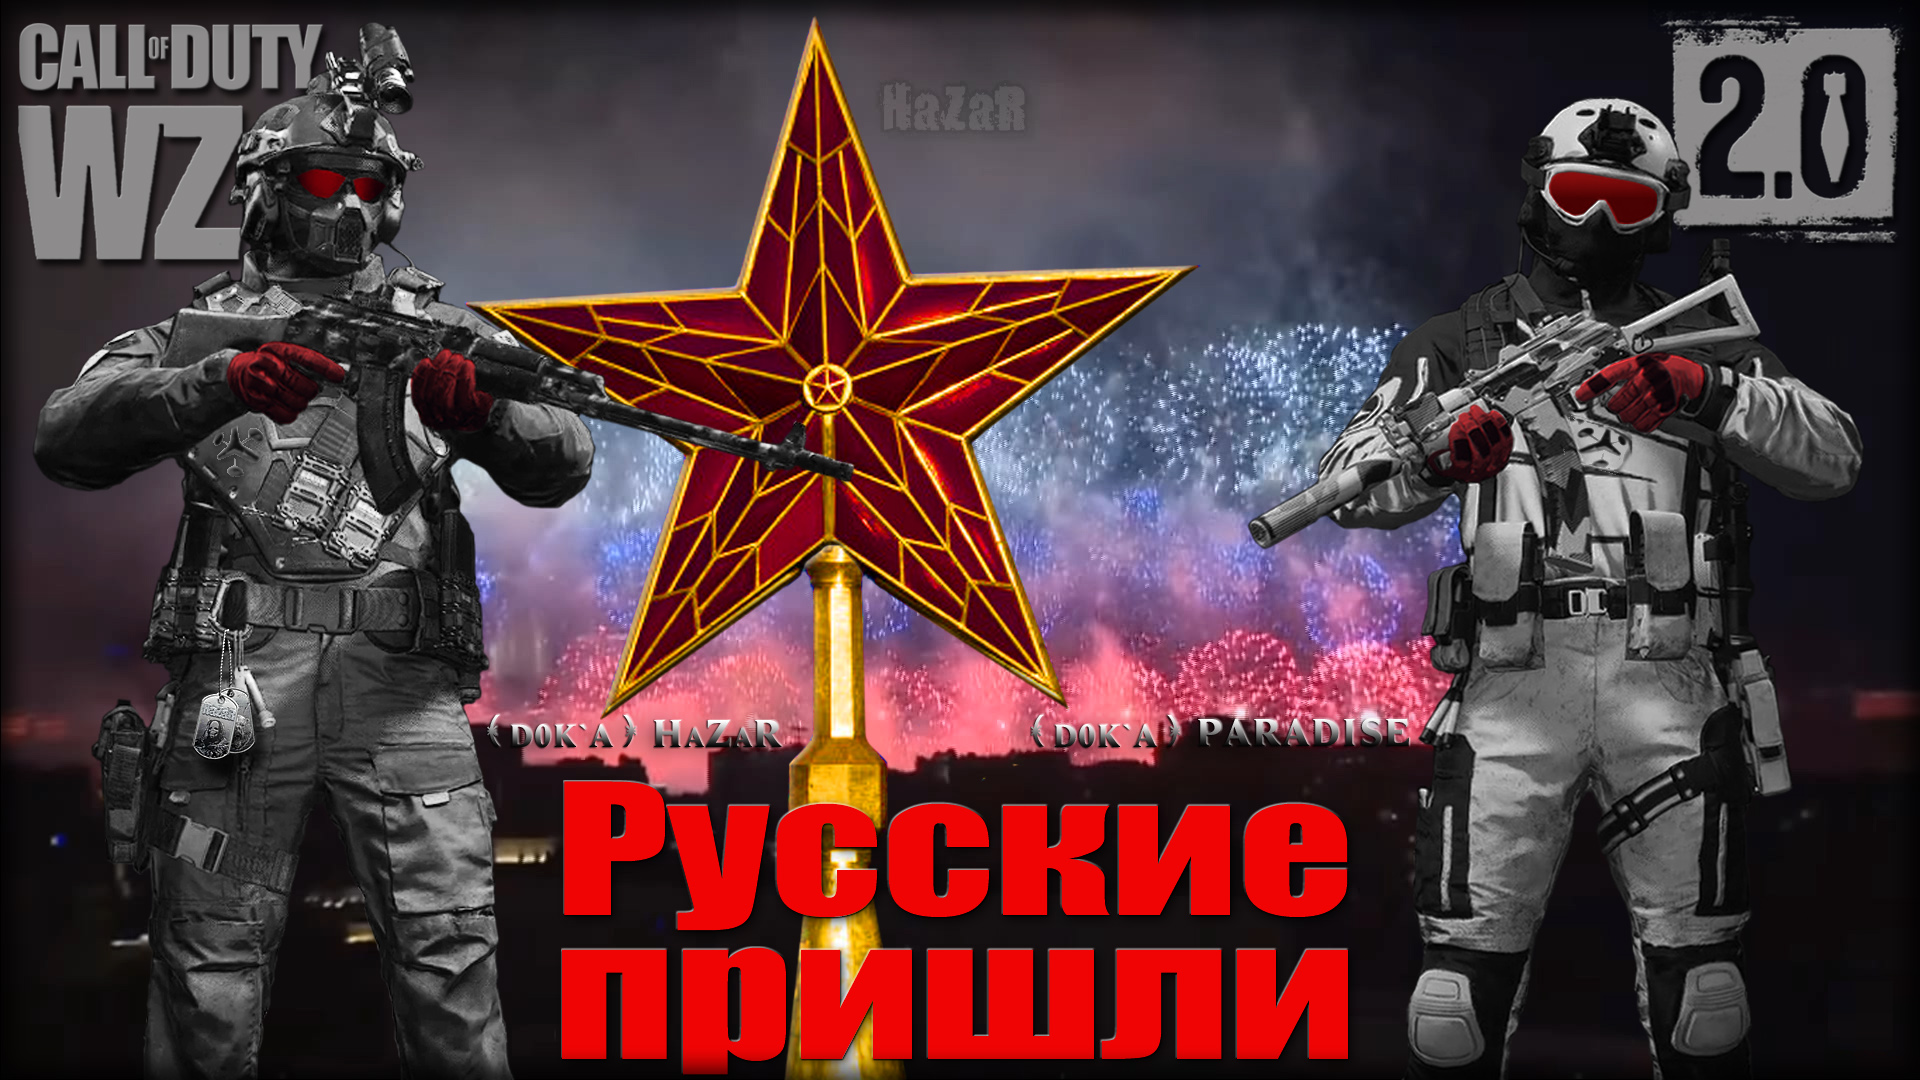 Русские пришли ? Warzone 2.0 ? Call of Duty. MWII. Gray Zone. Gameplay Win.2 vs 148.